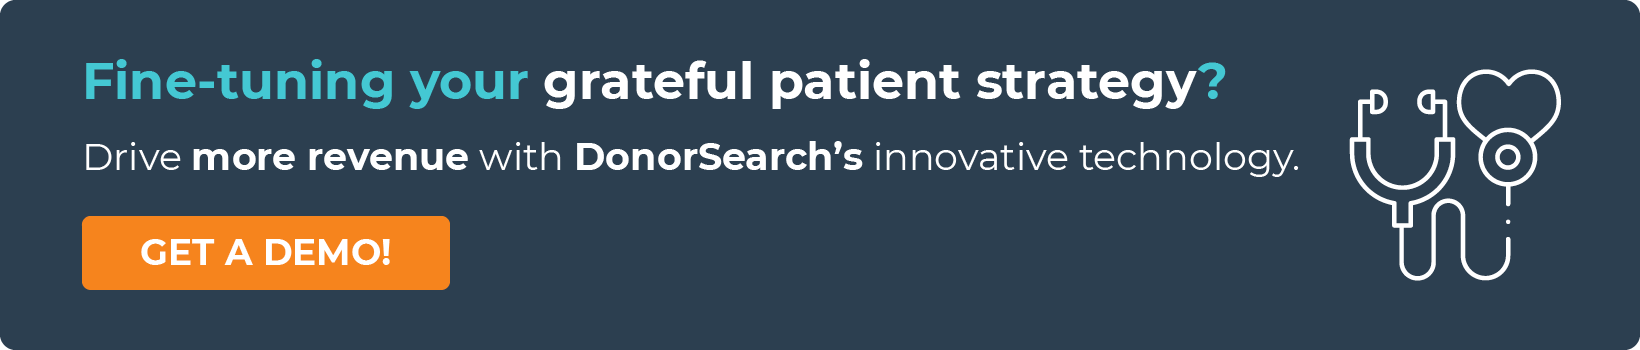 Click through to get a demo and learn how DonorSearch can help you with your grateful patient strategy. 